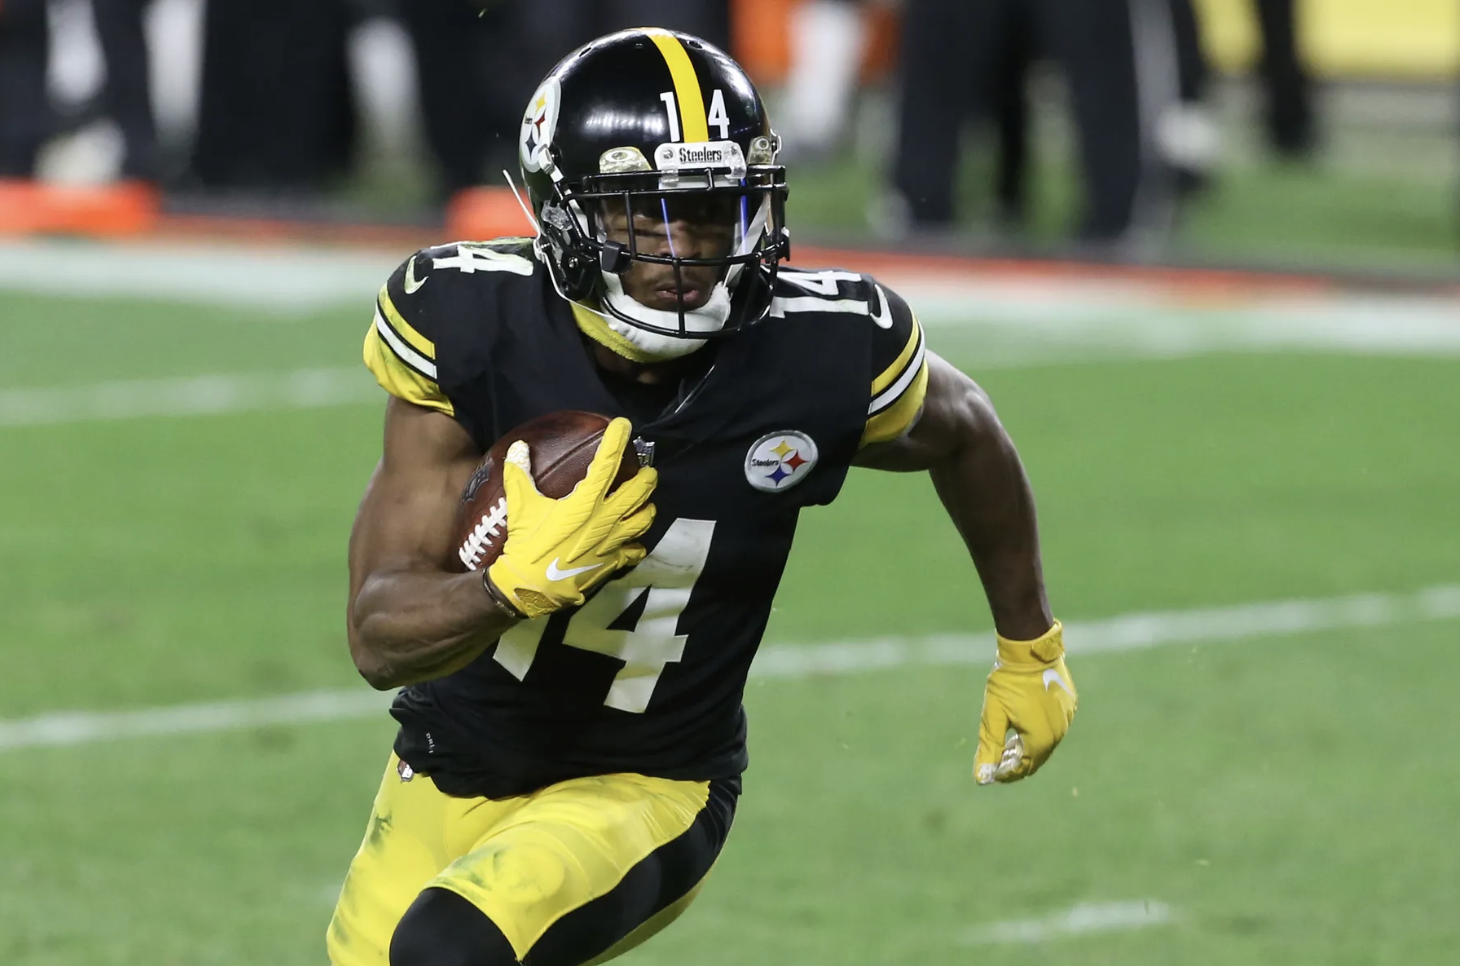 Pittsburgh Steelers:The Pittsburgh Steelers are a professional